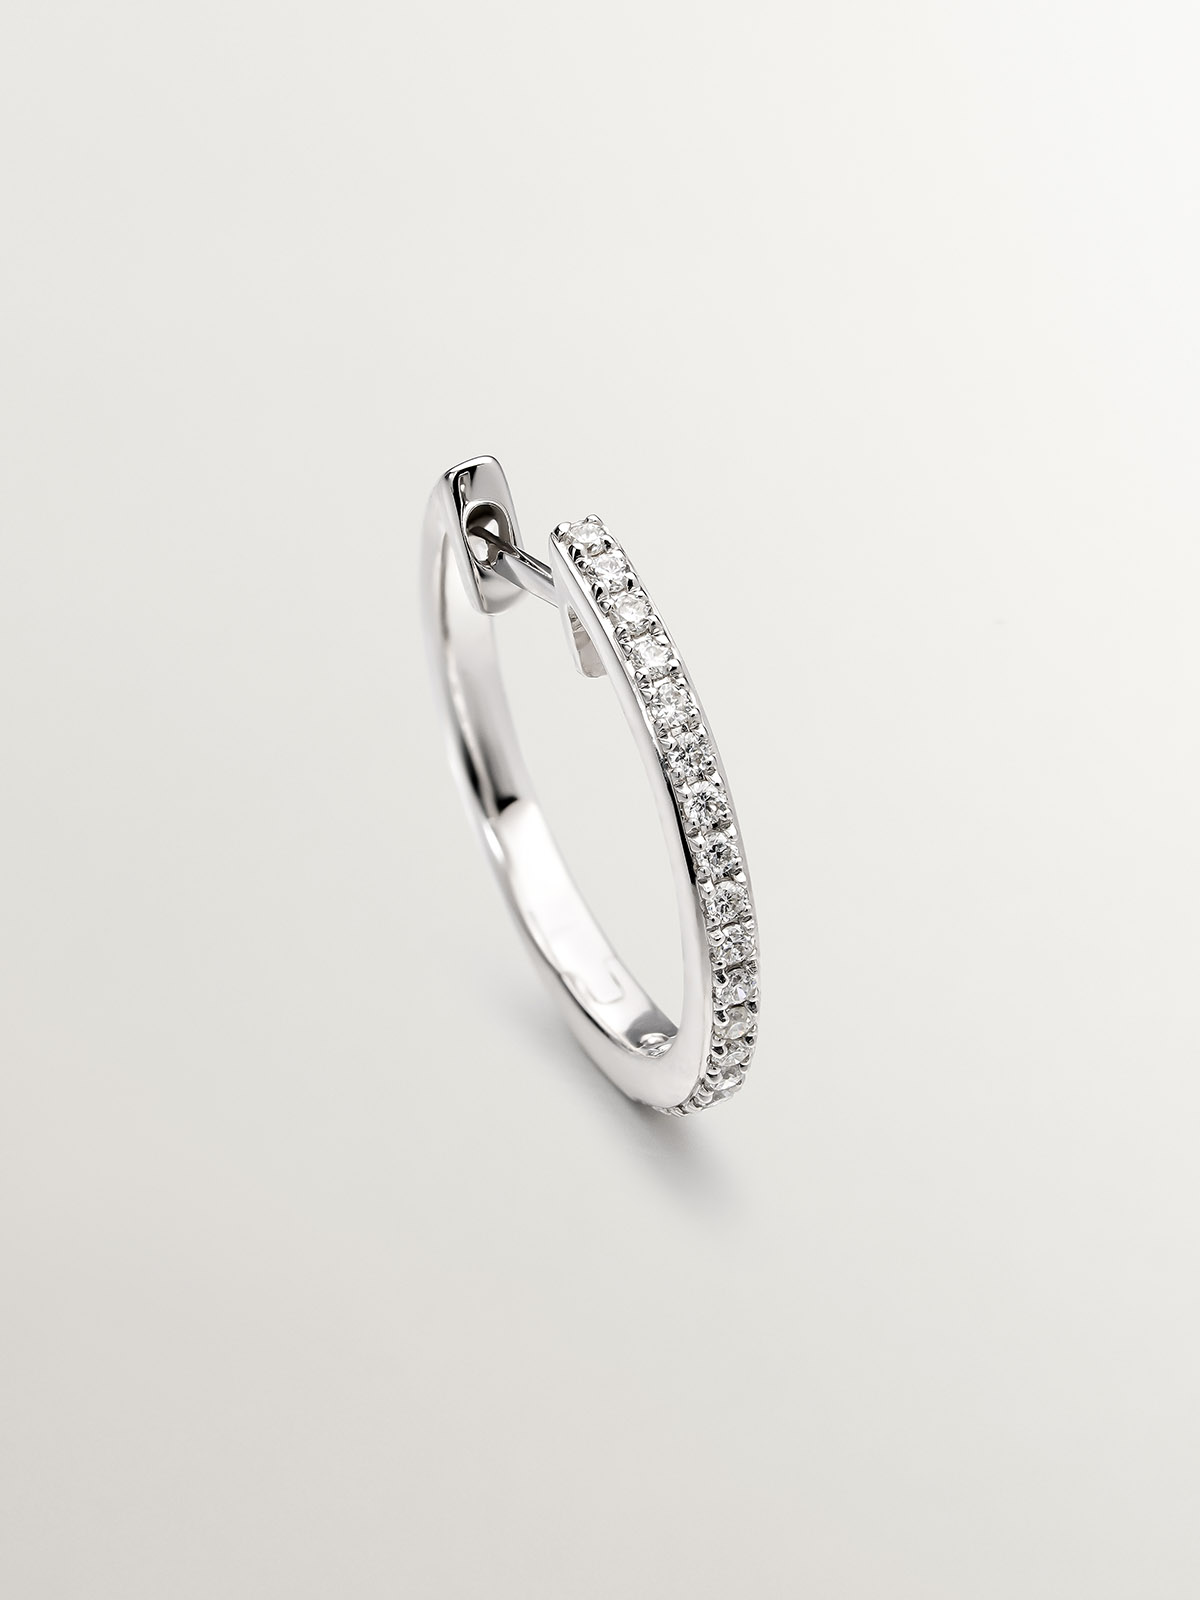 18K white gold small hoop earring with diamonds.